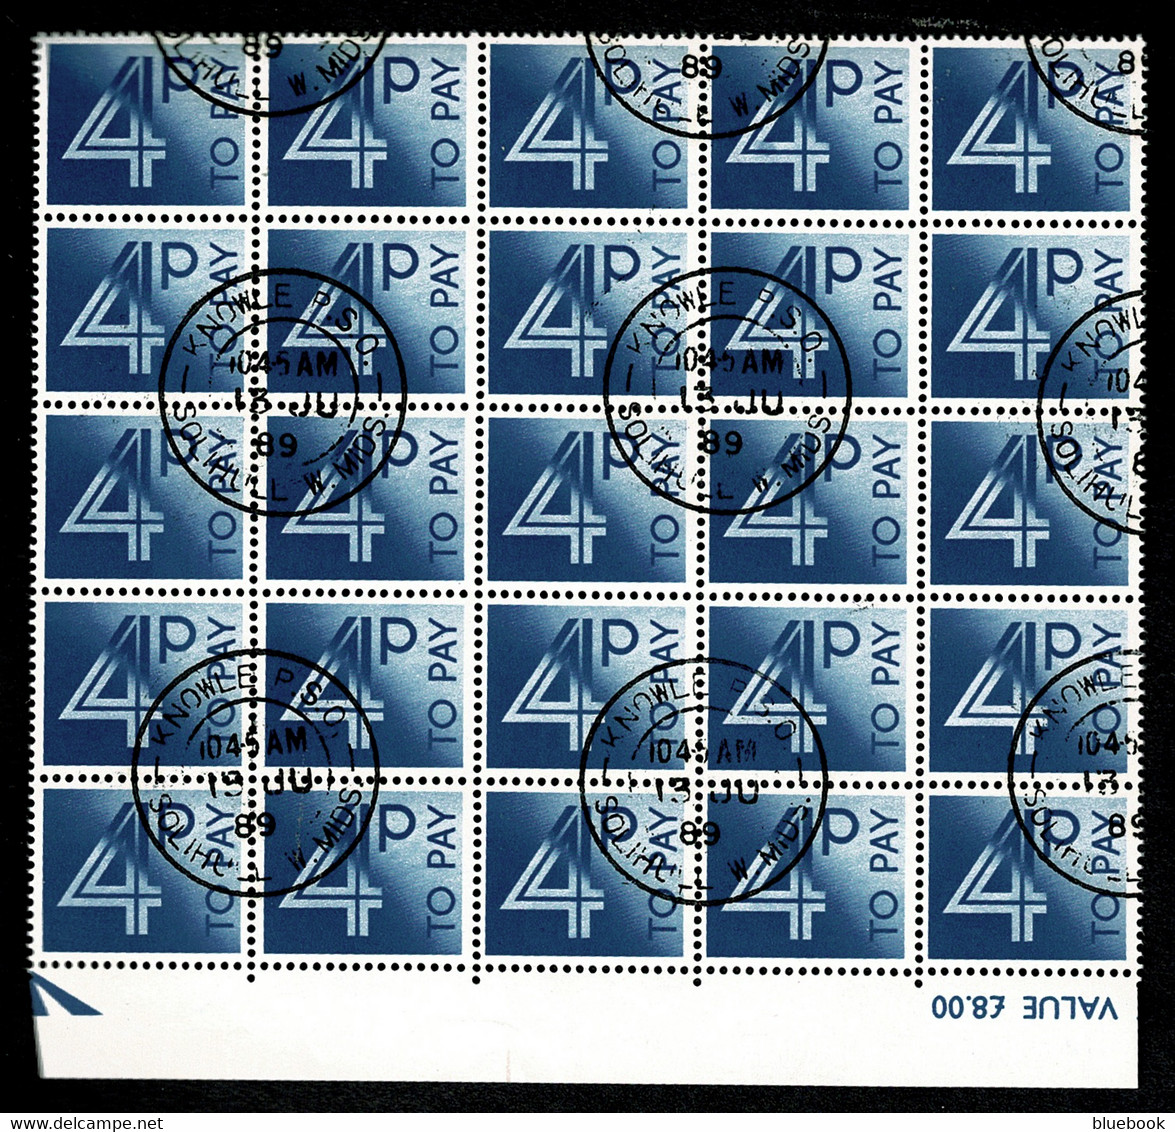 Ref 1565 - GB QEII - 4p Postage Due - Rare Used Marginal Block Of 25 Stamps - Taxe